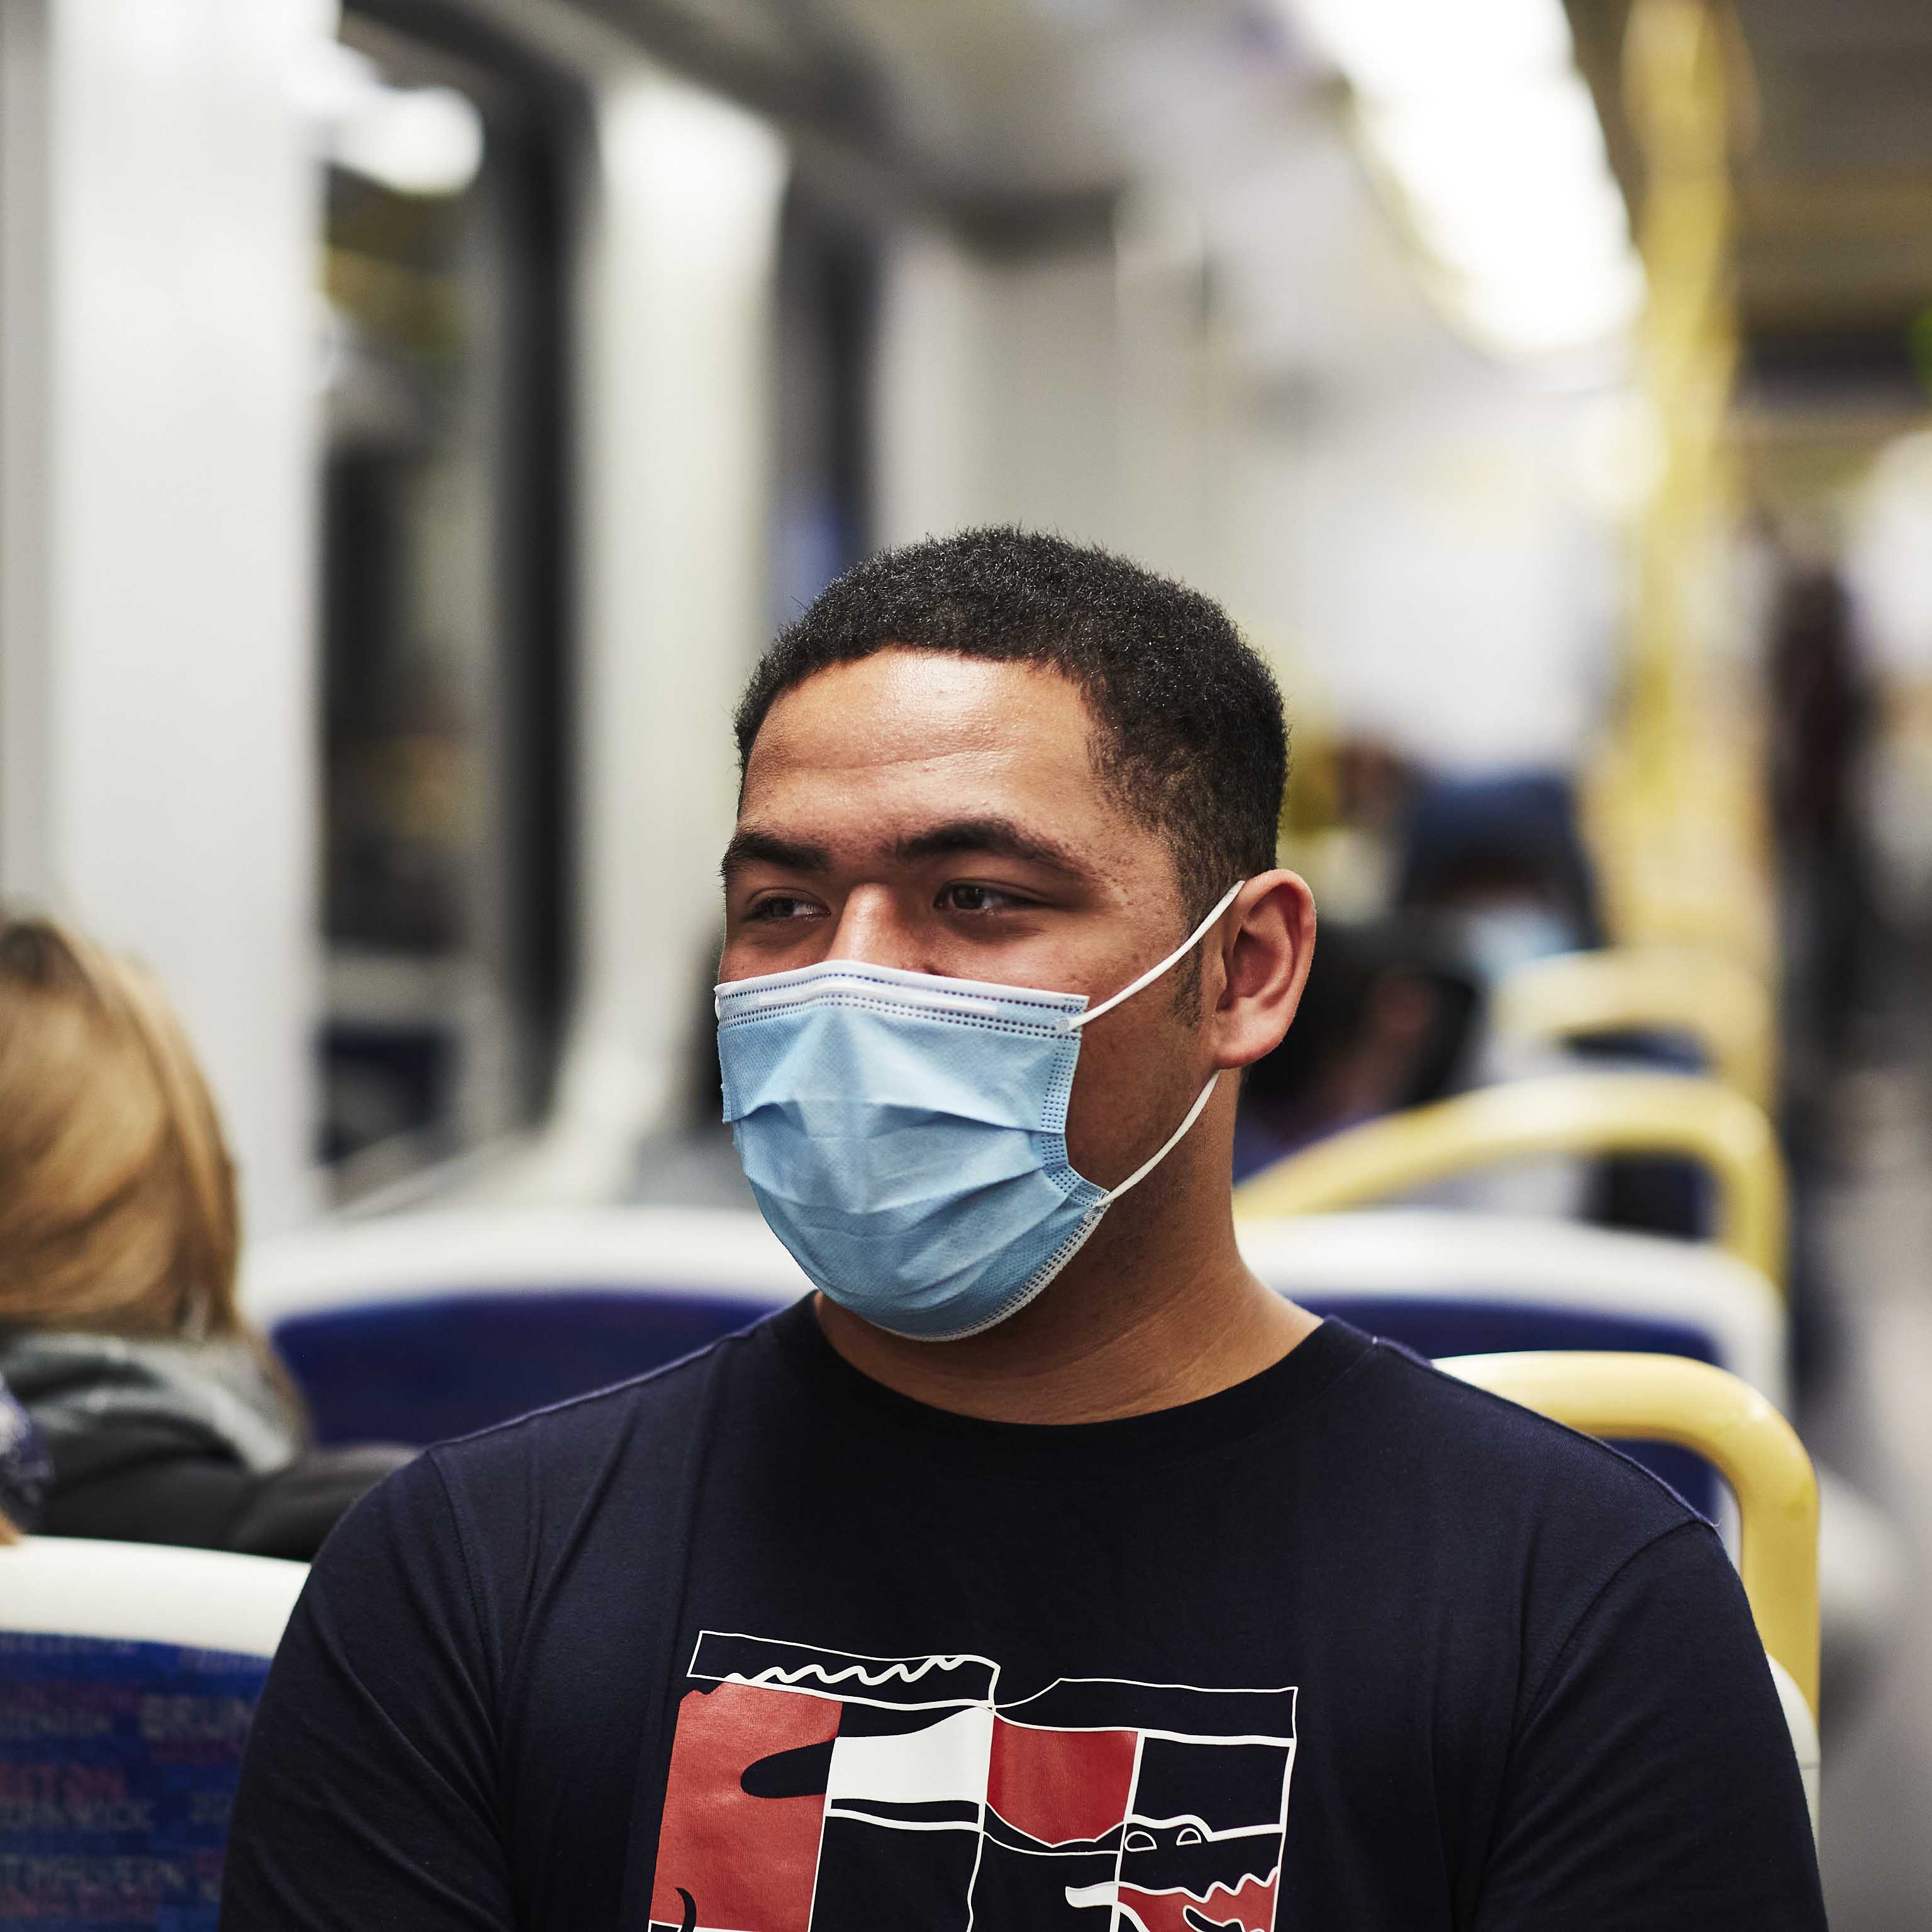 Image shows a person wearing a facemask while travelling on a train during the COVID-19 pandemic.